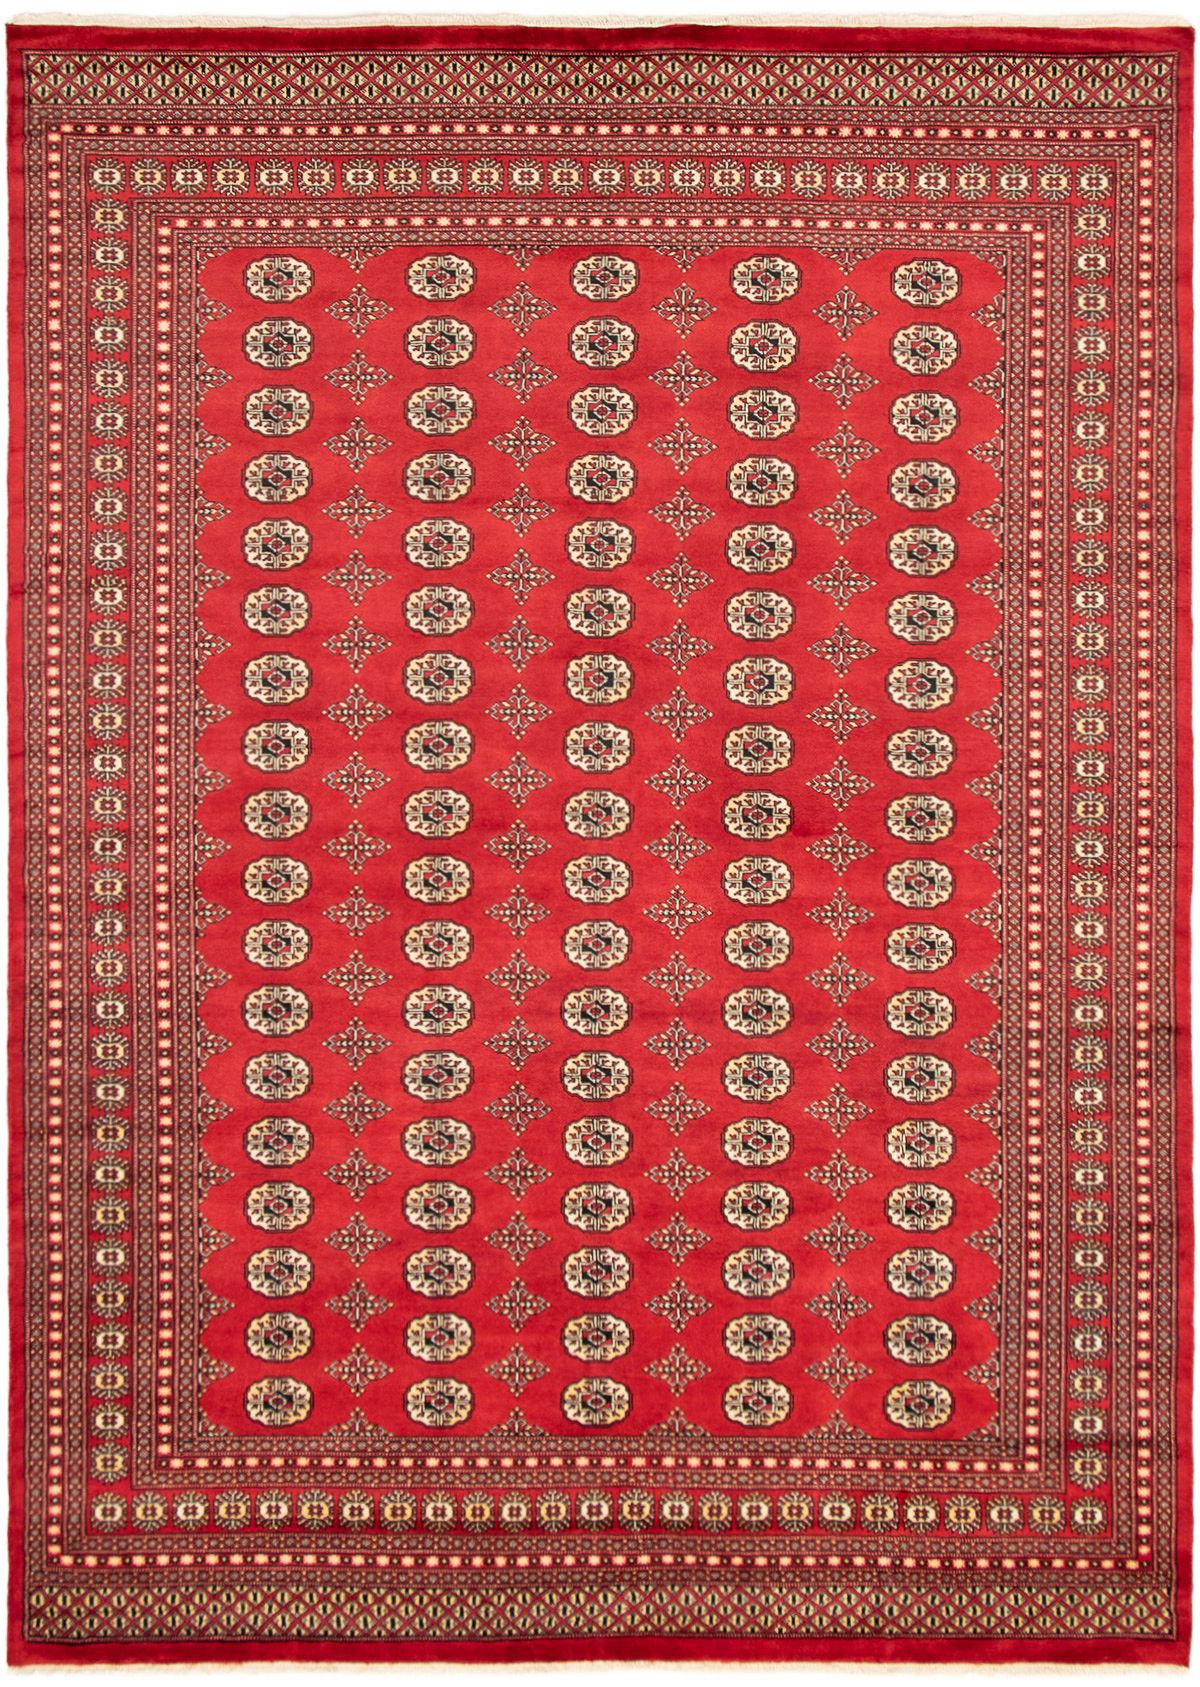 Hand-knotted Finest Peshawar Bokhara Red Wool Rug 8'11" x 11'5" Size: 8'11" x 11'5"  